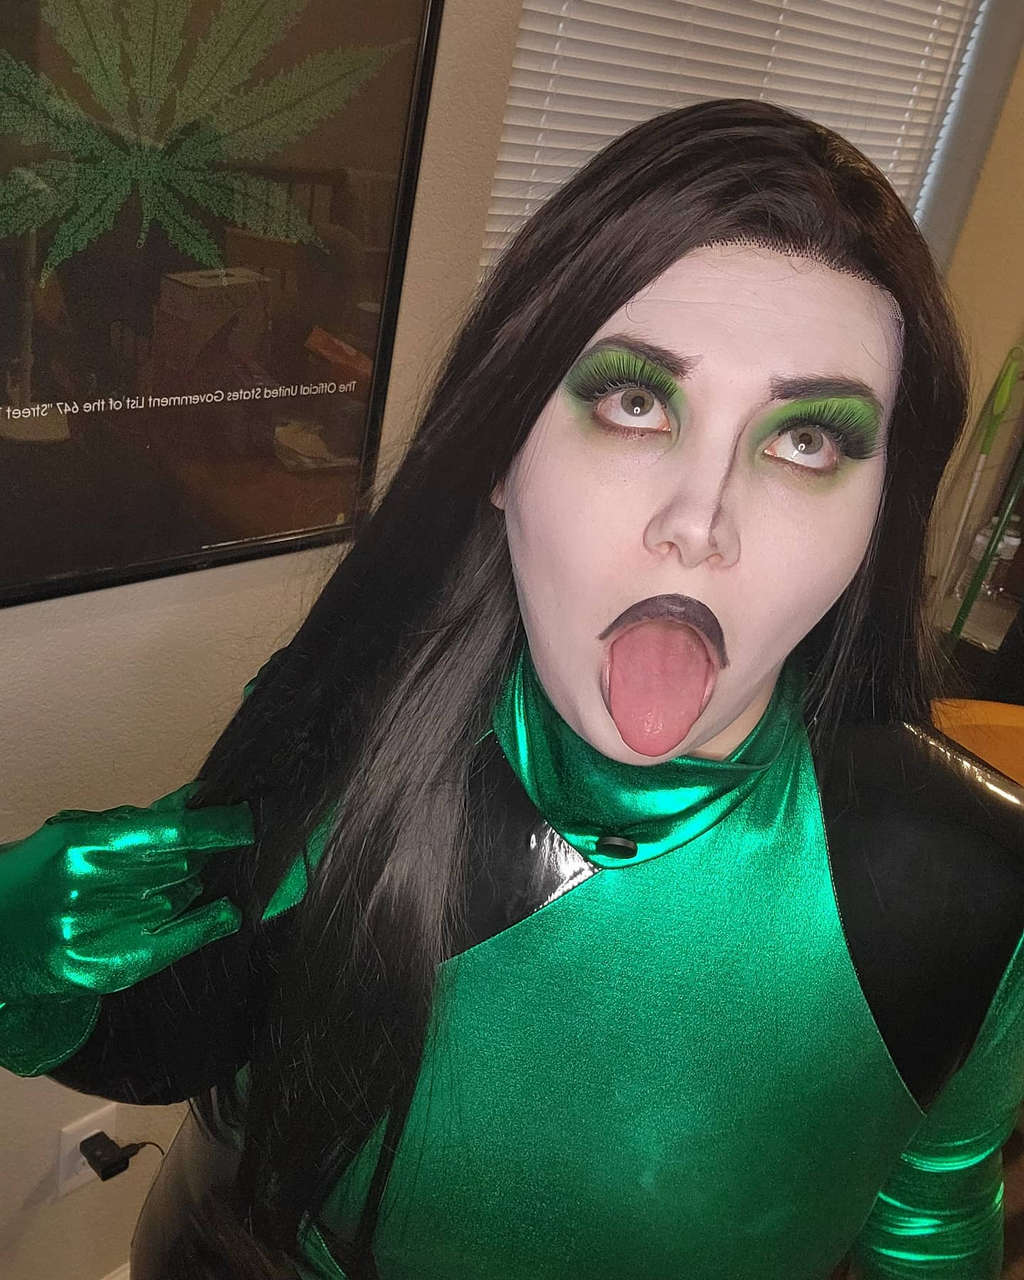 Shego From Kim Possible By Jade Margarit